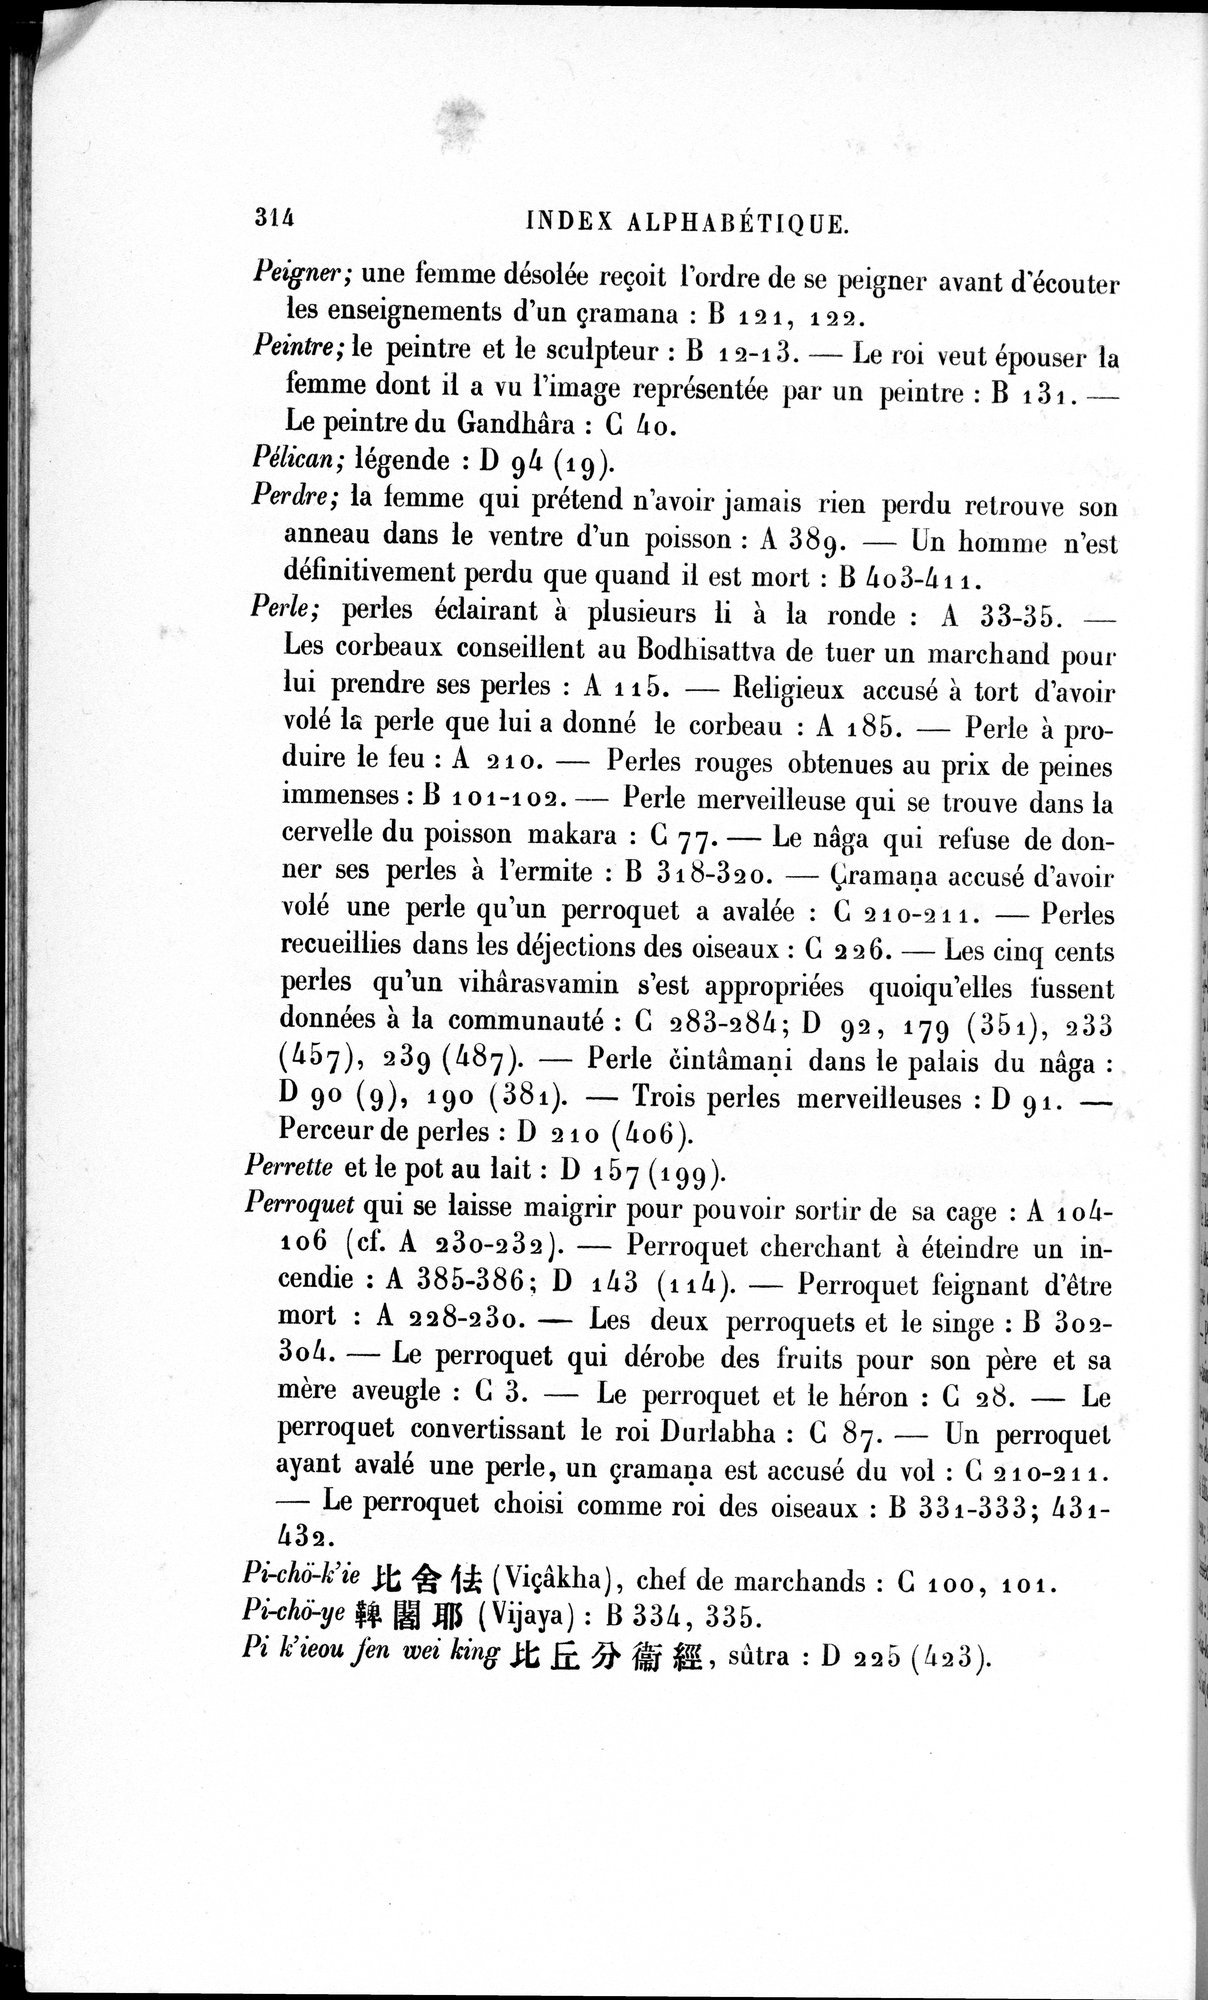 Cinq Cents Contes et Apologues : vol.4 / Page 334 (Grayscale High Resolution Image)